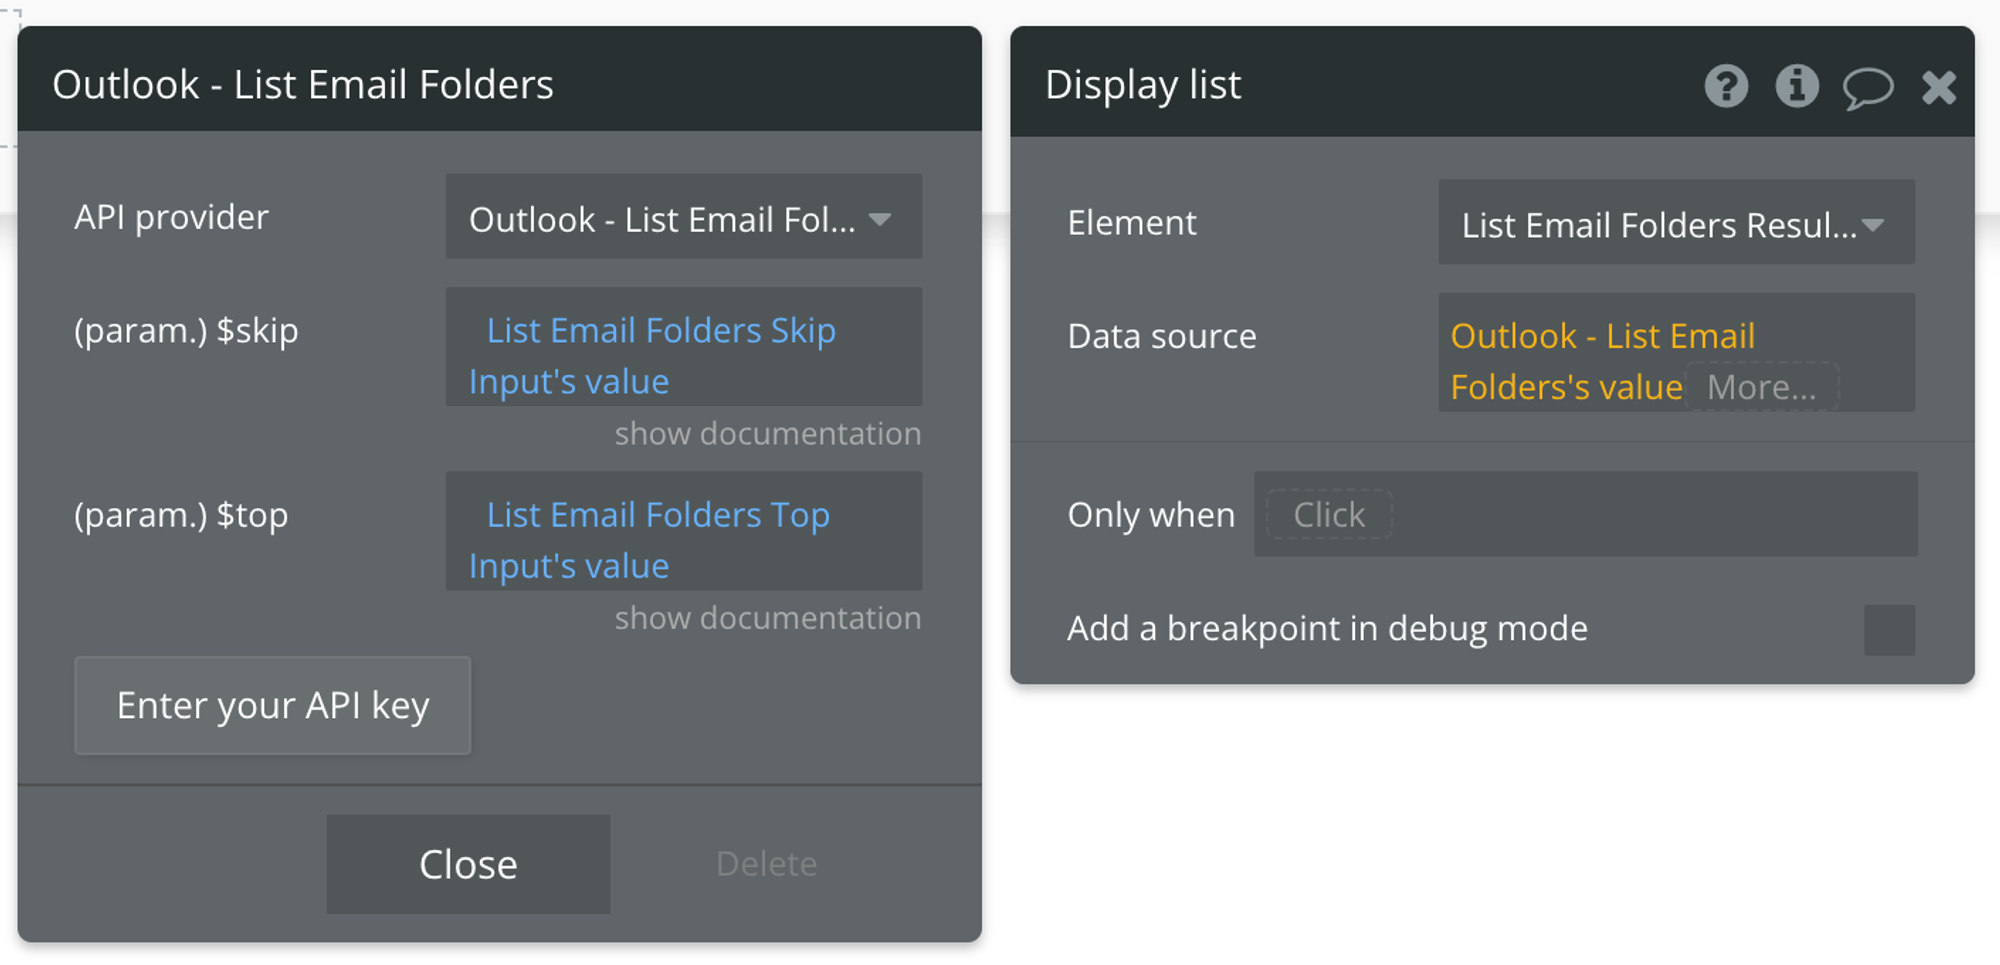 Select Outlook - List Email Folders's value for the data source